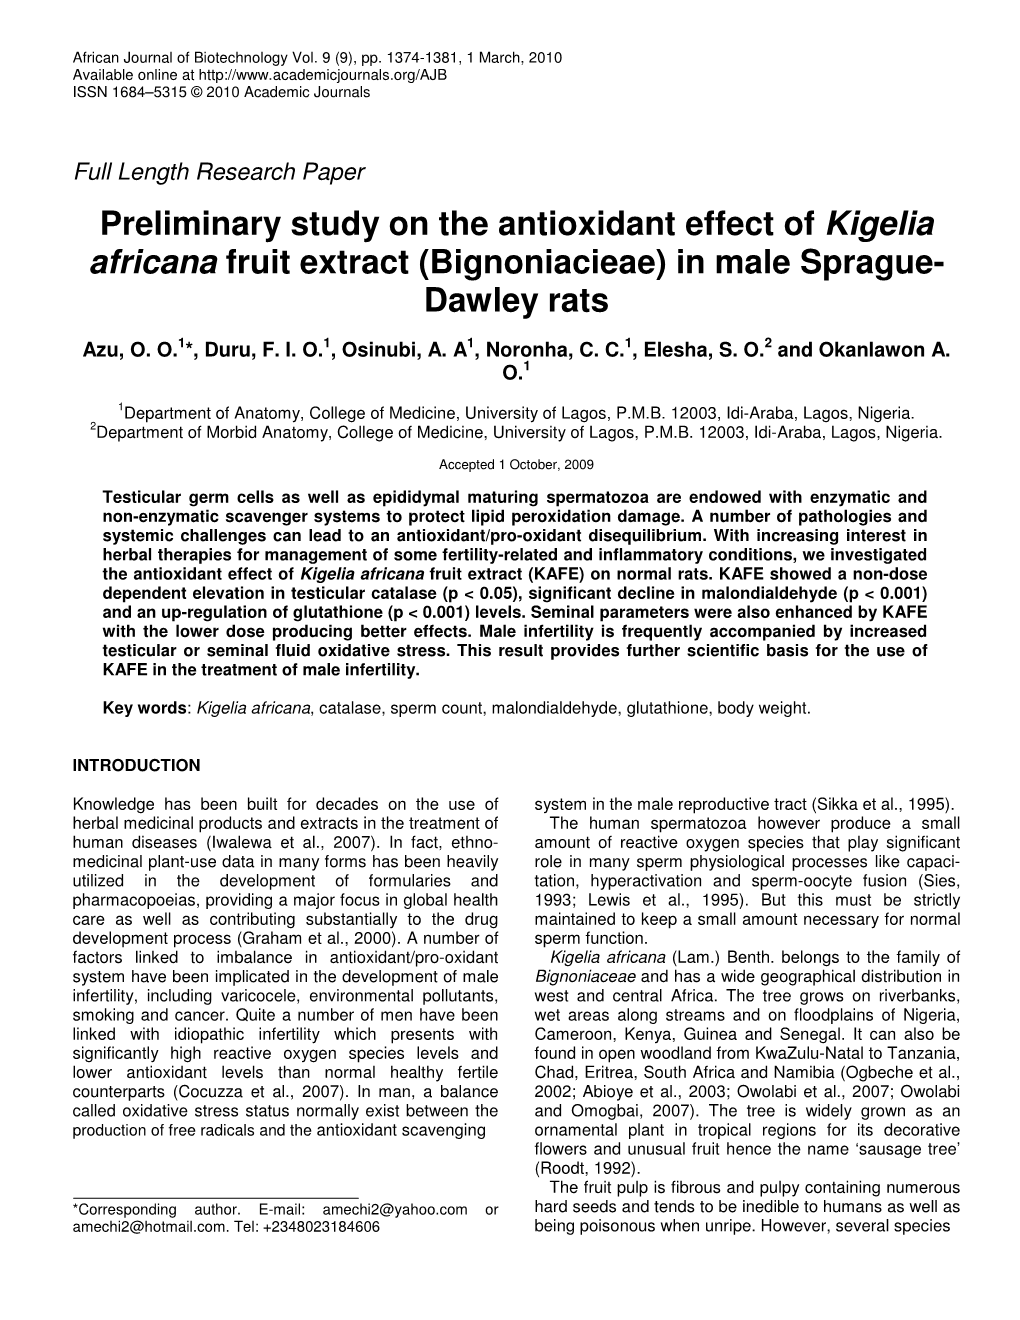 Preliminary Study on the Antioxidant Effect of Kigelia Africana Fruit Extract (Bignoniacieae) in Male Sprague- Dawley Rats